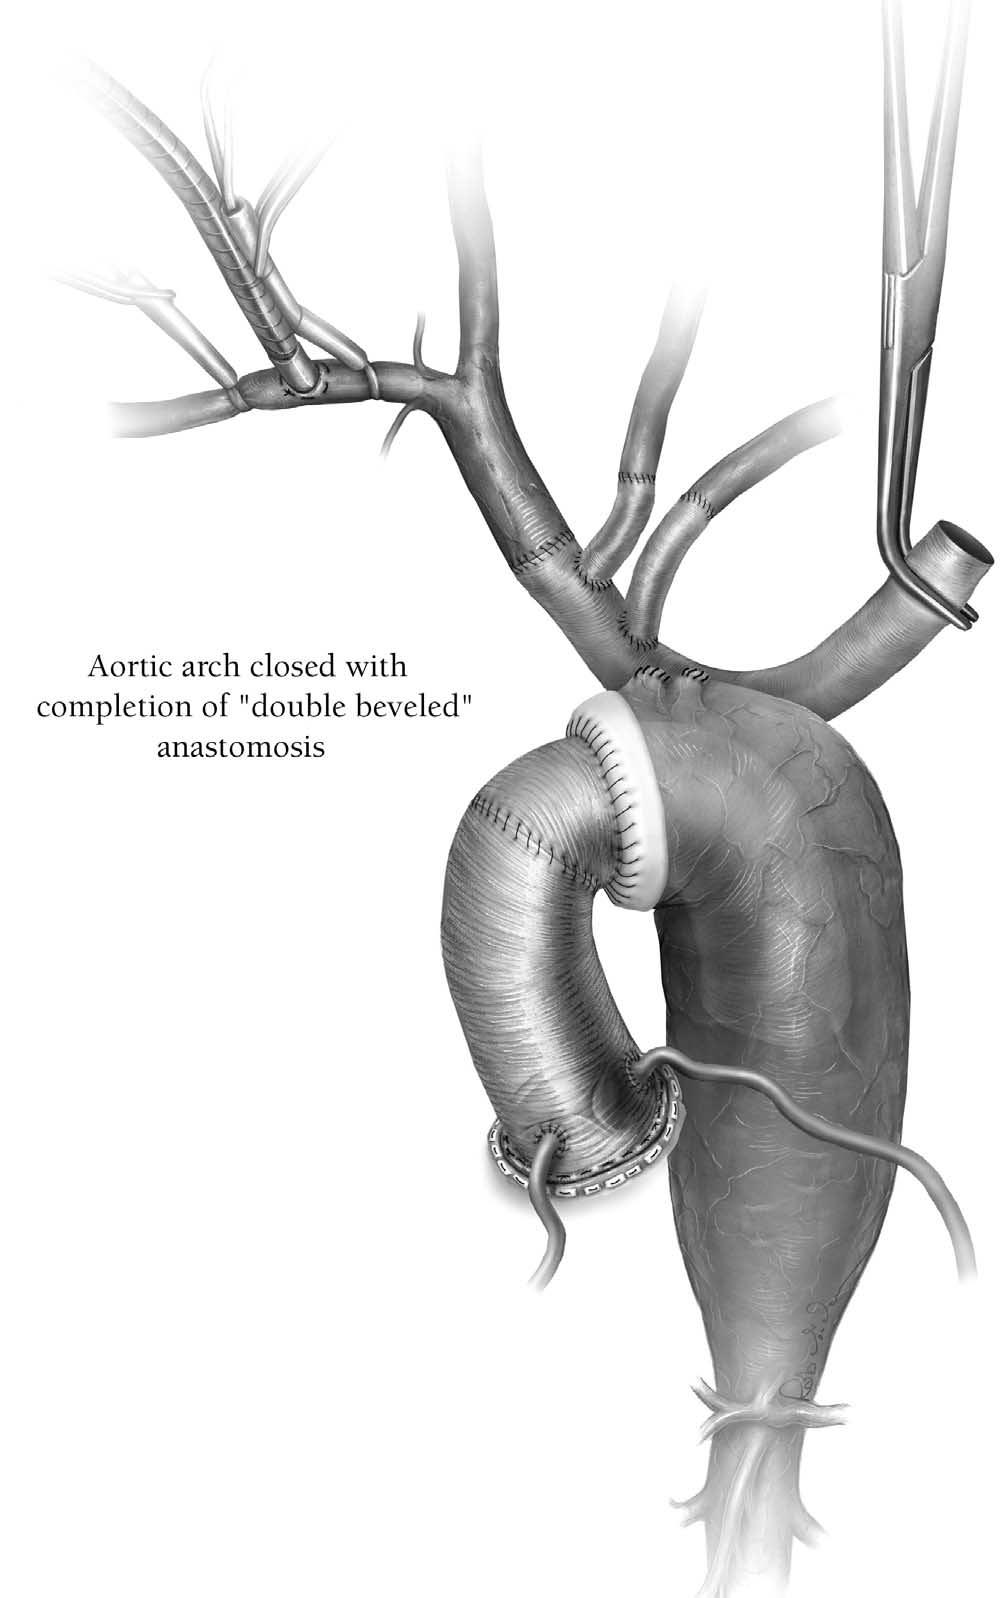 Aortic arch replacement/selective antegrade perfusion 33 Figure 10 A 2-0 polypropylene suture is used to